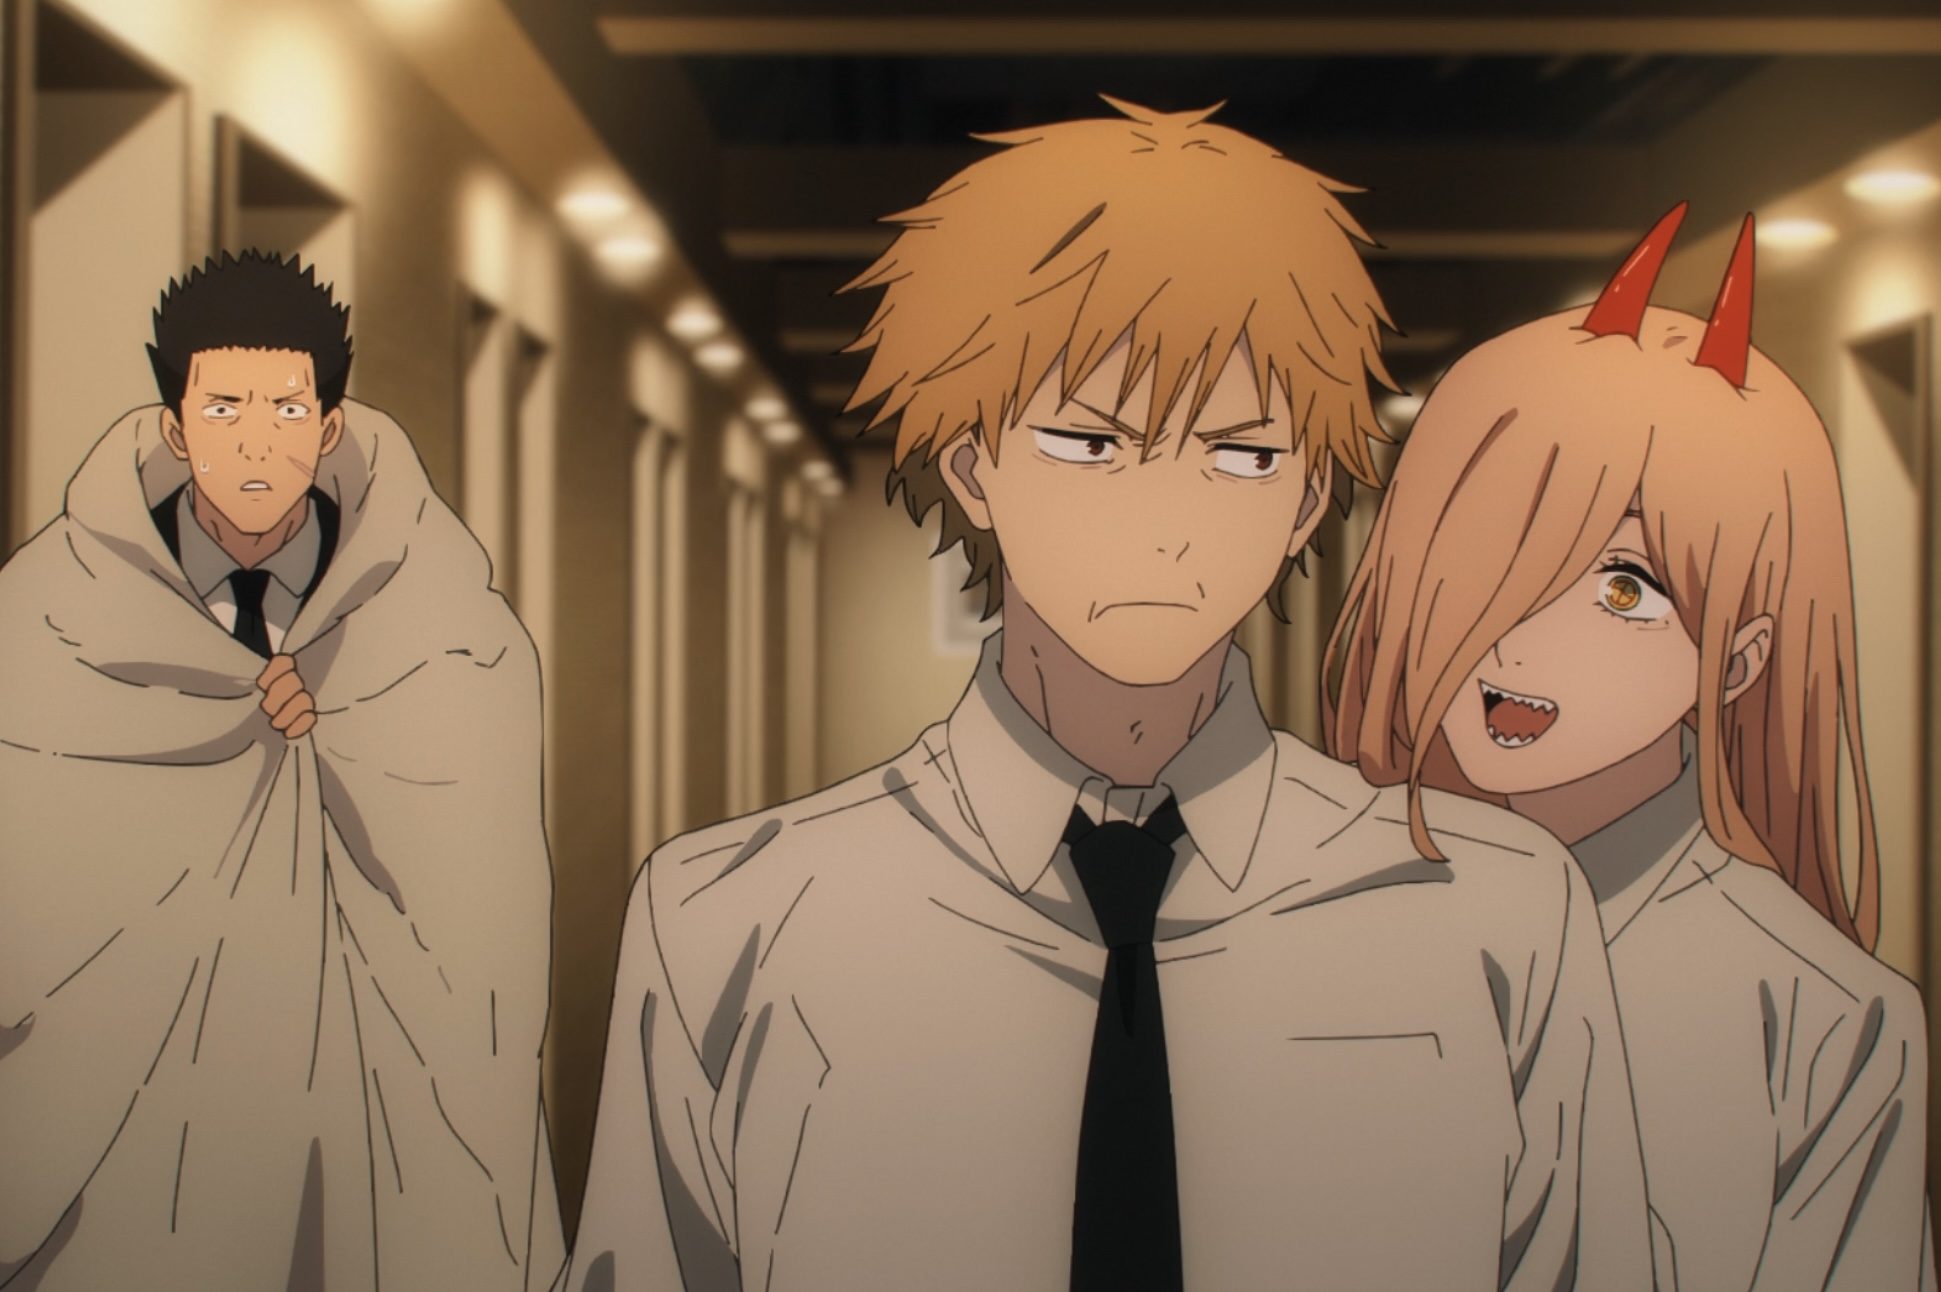 Chainsaw Man Episode 2 Review/Recap: Denji's First Day At His